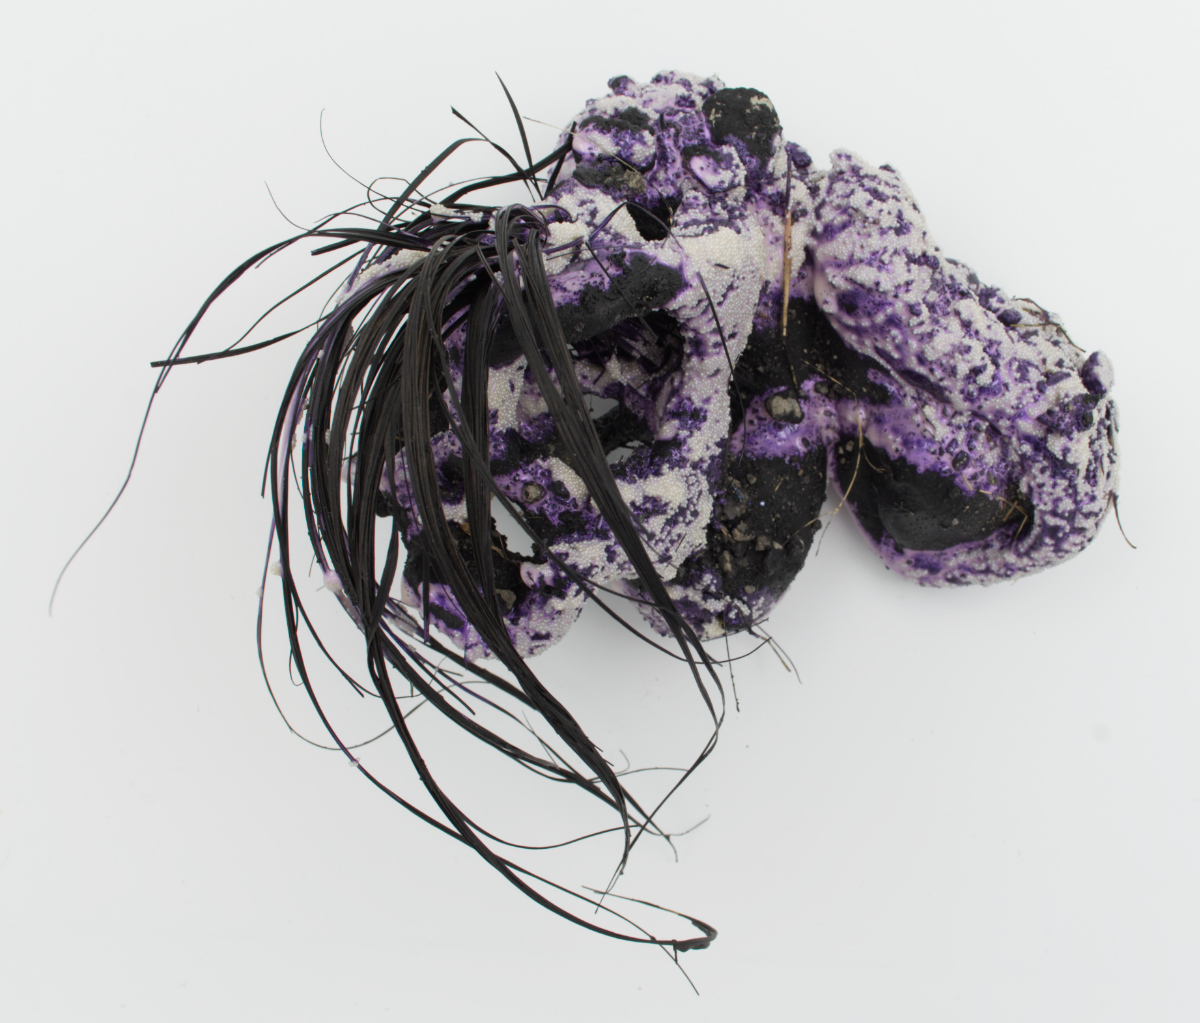 Devious Frequency 4, 2022: stoneware, air-dry clay, resin, glass, dirt, rocks, grass, pva, acrylic paint, 6 inches x 6 inches x 2 inches